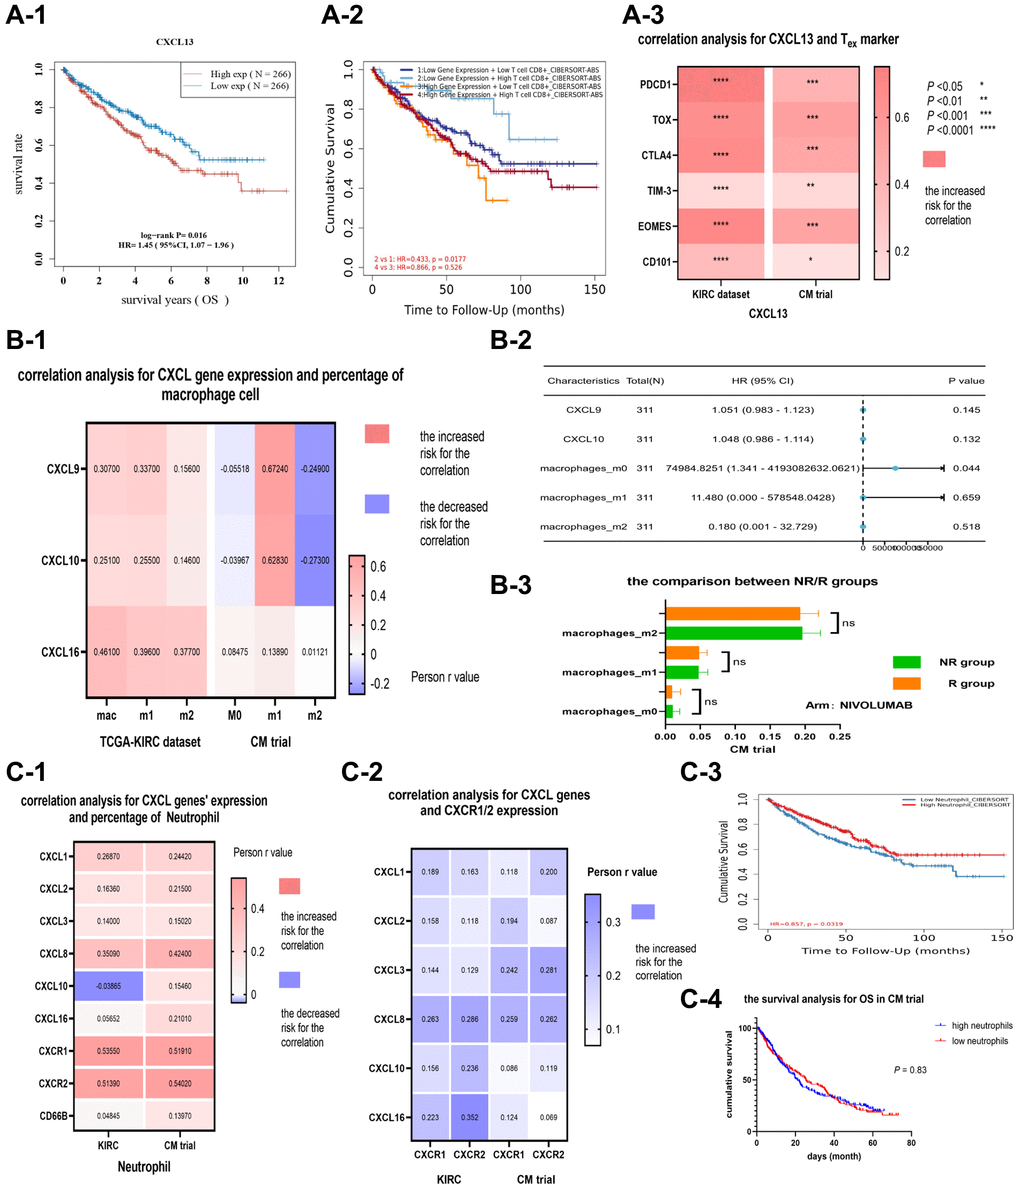 The correlation and prognostic analysis of CXCL13 and CD8 exhausted cells (A). The KM analysis (A-1) of CXCL13 in the KIRC dataset, (A-2) of CXCL13 and CD8+ T cell percentage combined. The correlation between CXCL13 and markers of CD8 exhausted cell (A-3). The correlation and prognostic value of CXCL9/10 and macrophage M1 cells (B). The correlation between CXCL9/10 and three types of macrophage cells (B-1), and the forest plot (B-2) showing CXCL9/10 expression level and the percentages of three types of macrophage cells in the KIRC dataset. The variance analysis (B-3) of three types of macrophage cells between immunotherapy response and non-response groups. The correlation and prognostic value of CXCL genes and neutrophil (C). The correlations (C-1) among CXCL genes, CXCR1/2, and the percentage of neutrophil in two datasets, as well as the correlation (C-2) between CXCL genes and CXCR1/2. The KM analysis (C-3) for the percentage of neutrophil in the KIRC dataset (P = 0.03), and the KM analysis (C-4) for the percentage of neutrophil in the CM dataset (P = 0.83).